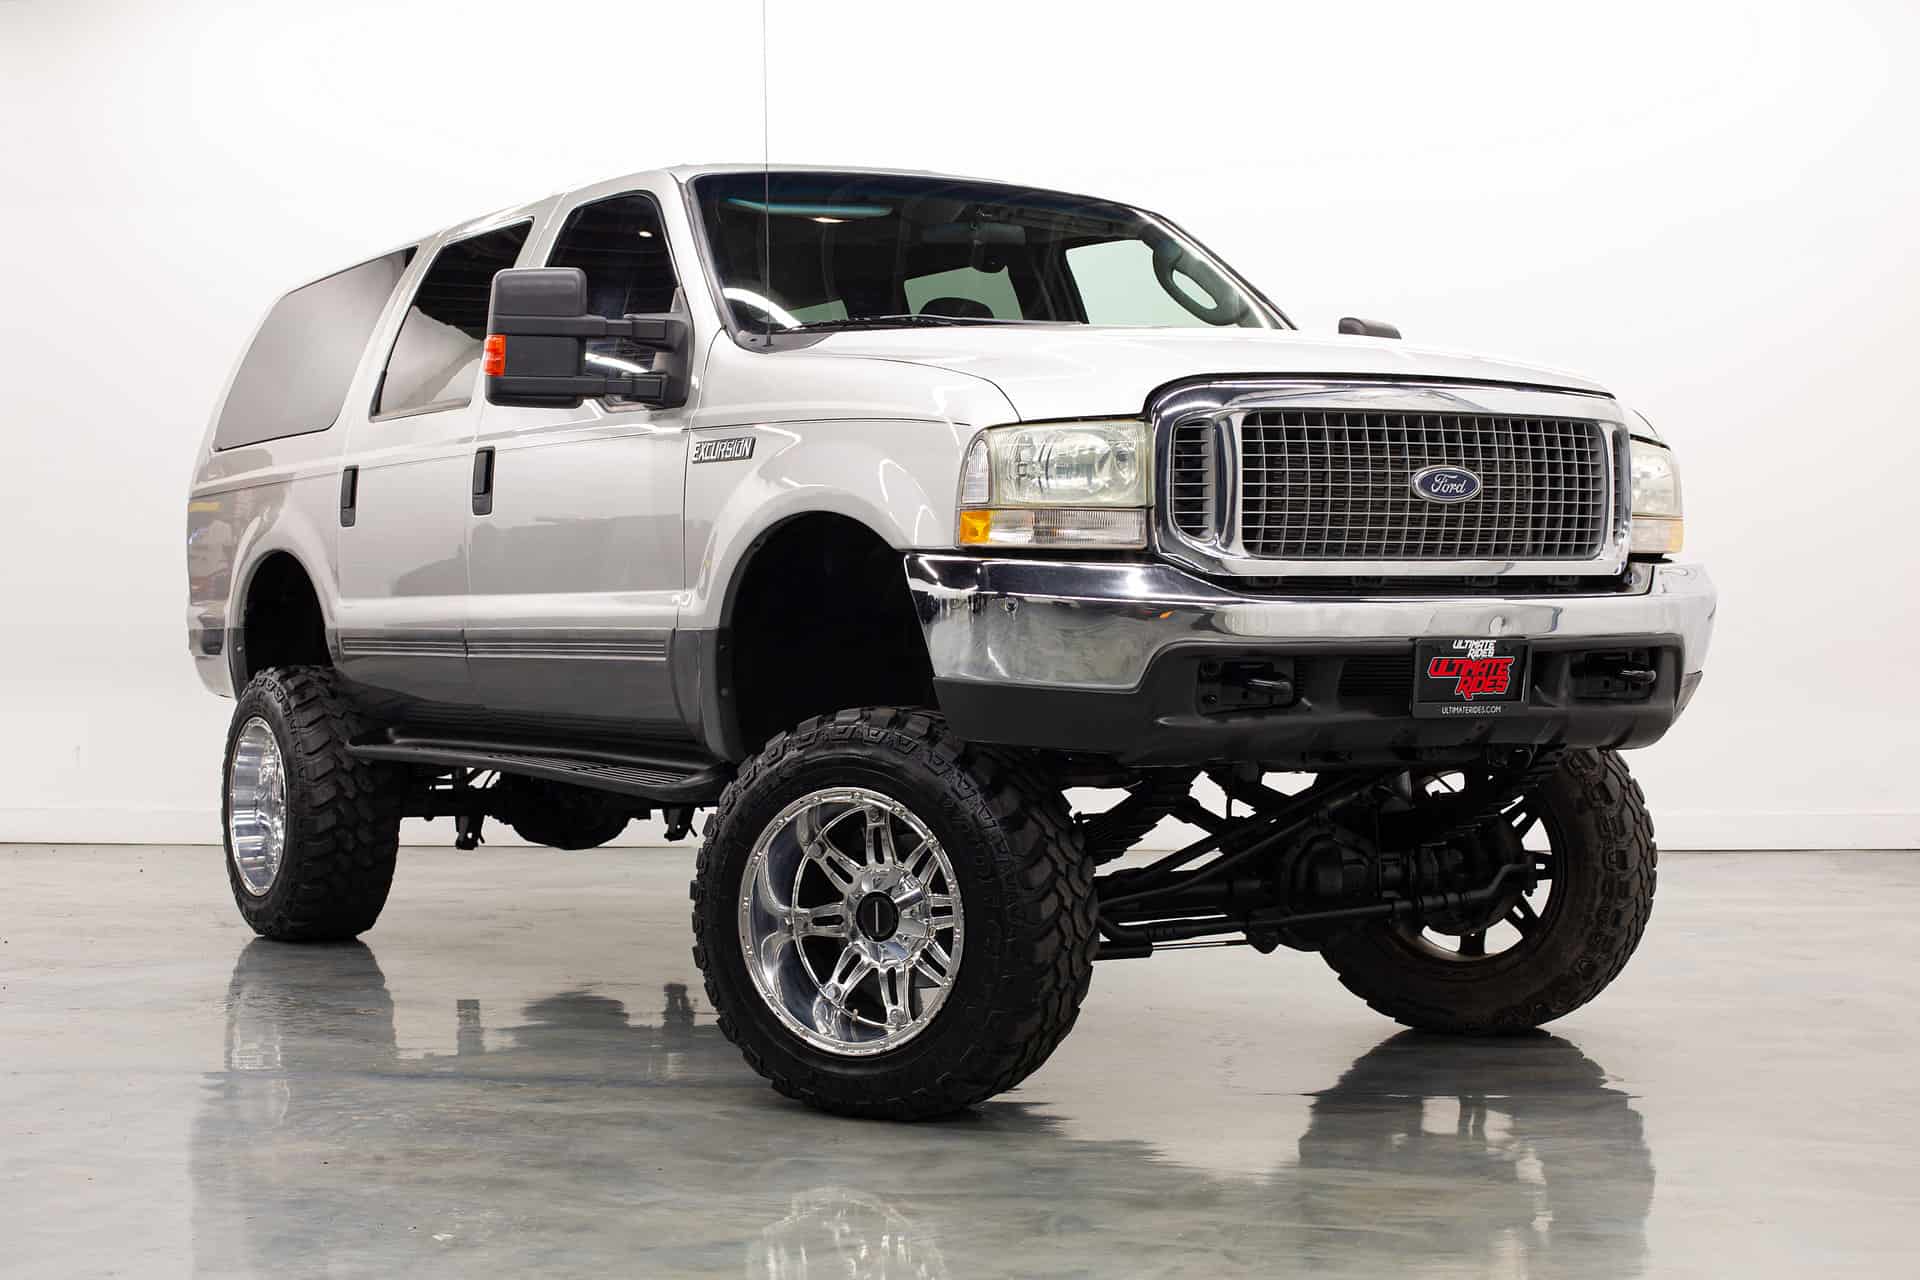 Lifted Trucks for Sale in Wyoming